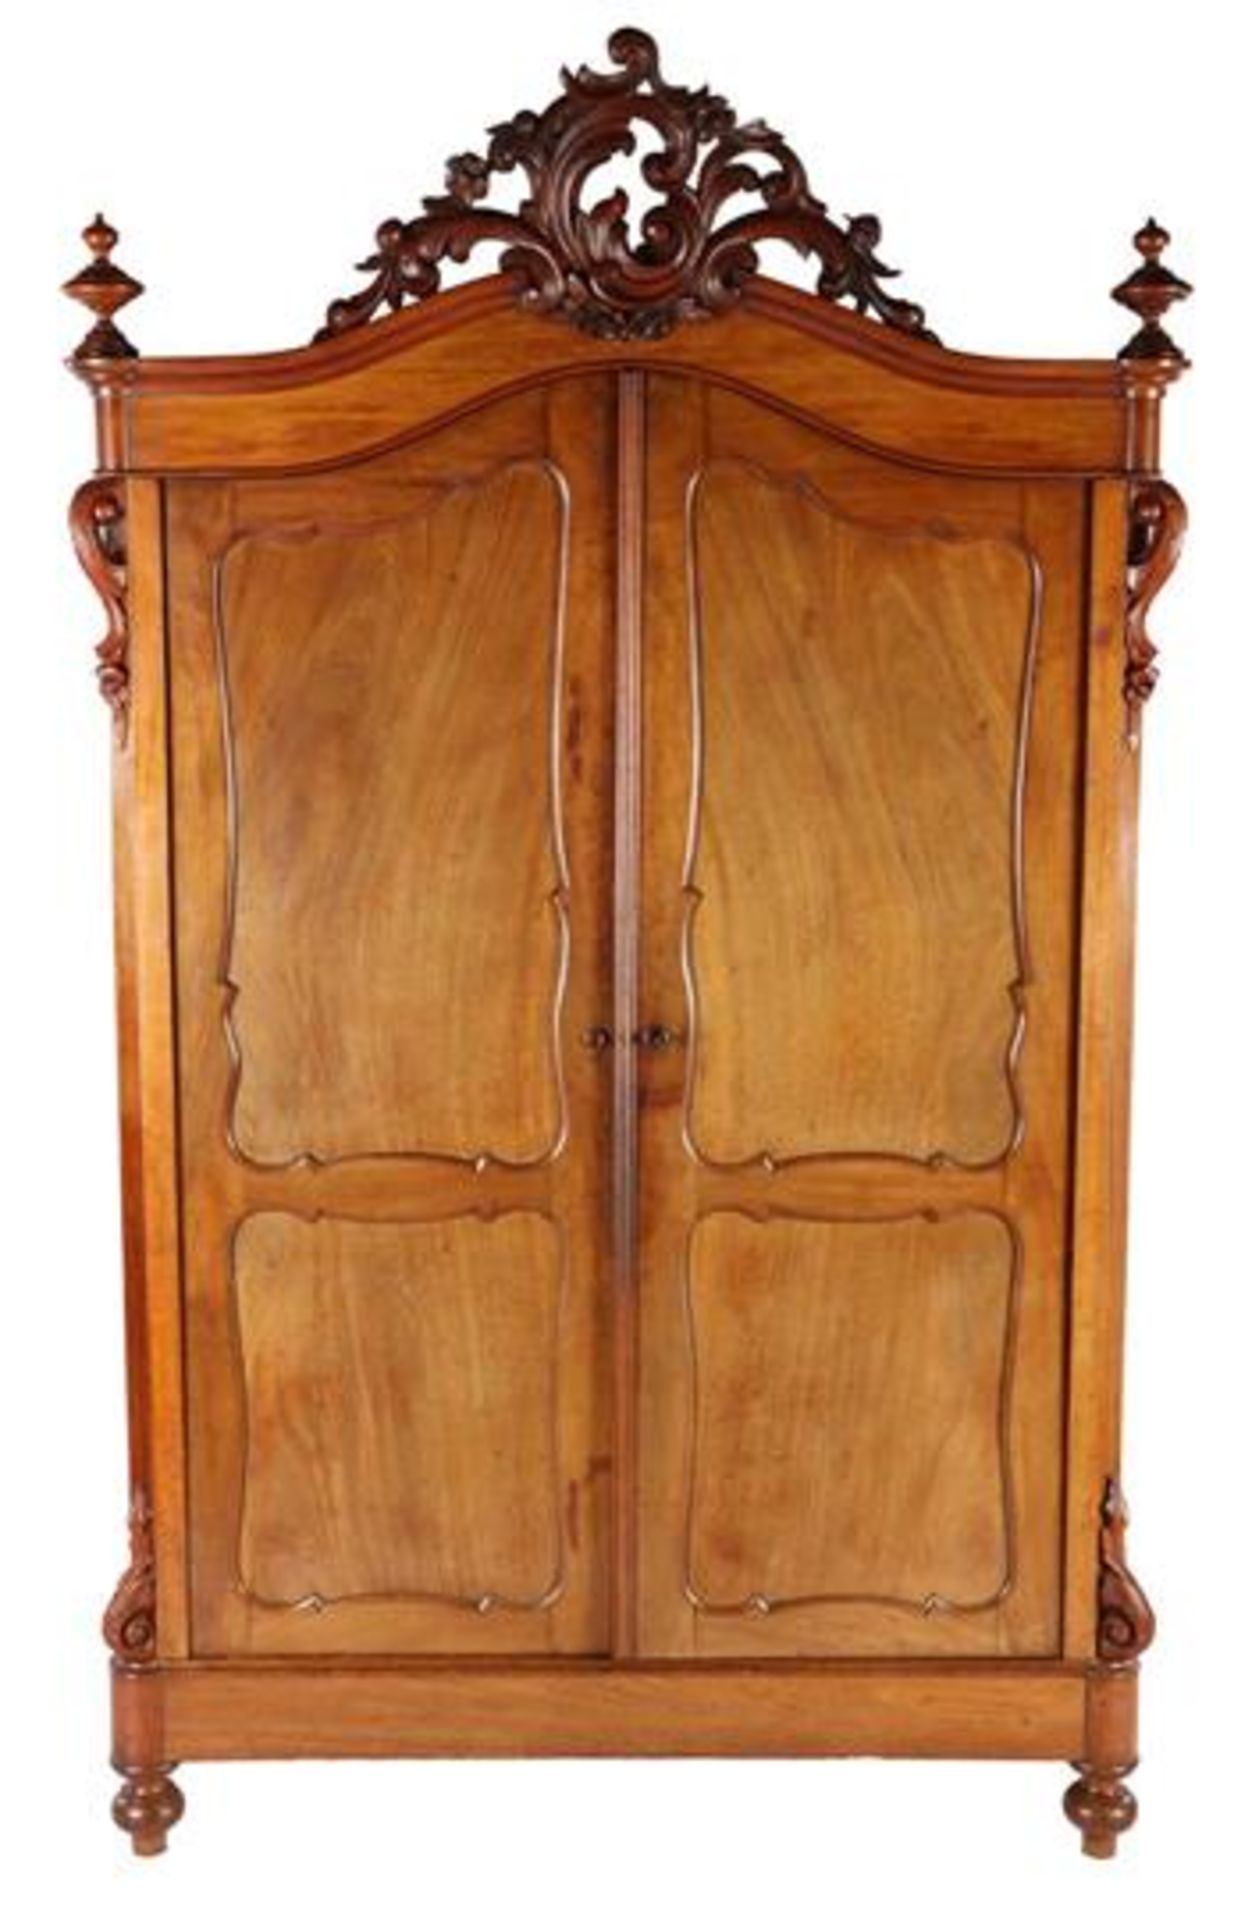 Mahogany Biedermeier 2-door cabinet with crest, with shelves and 2 drawers in the cabinet & nbsp;